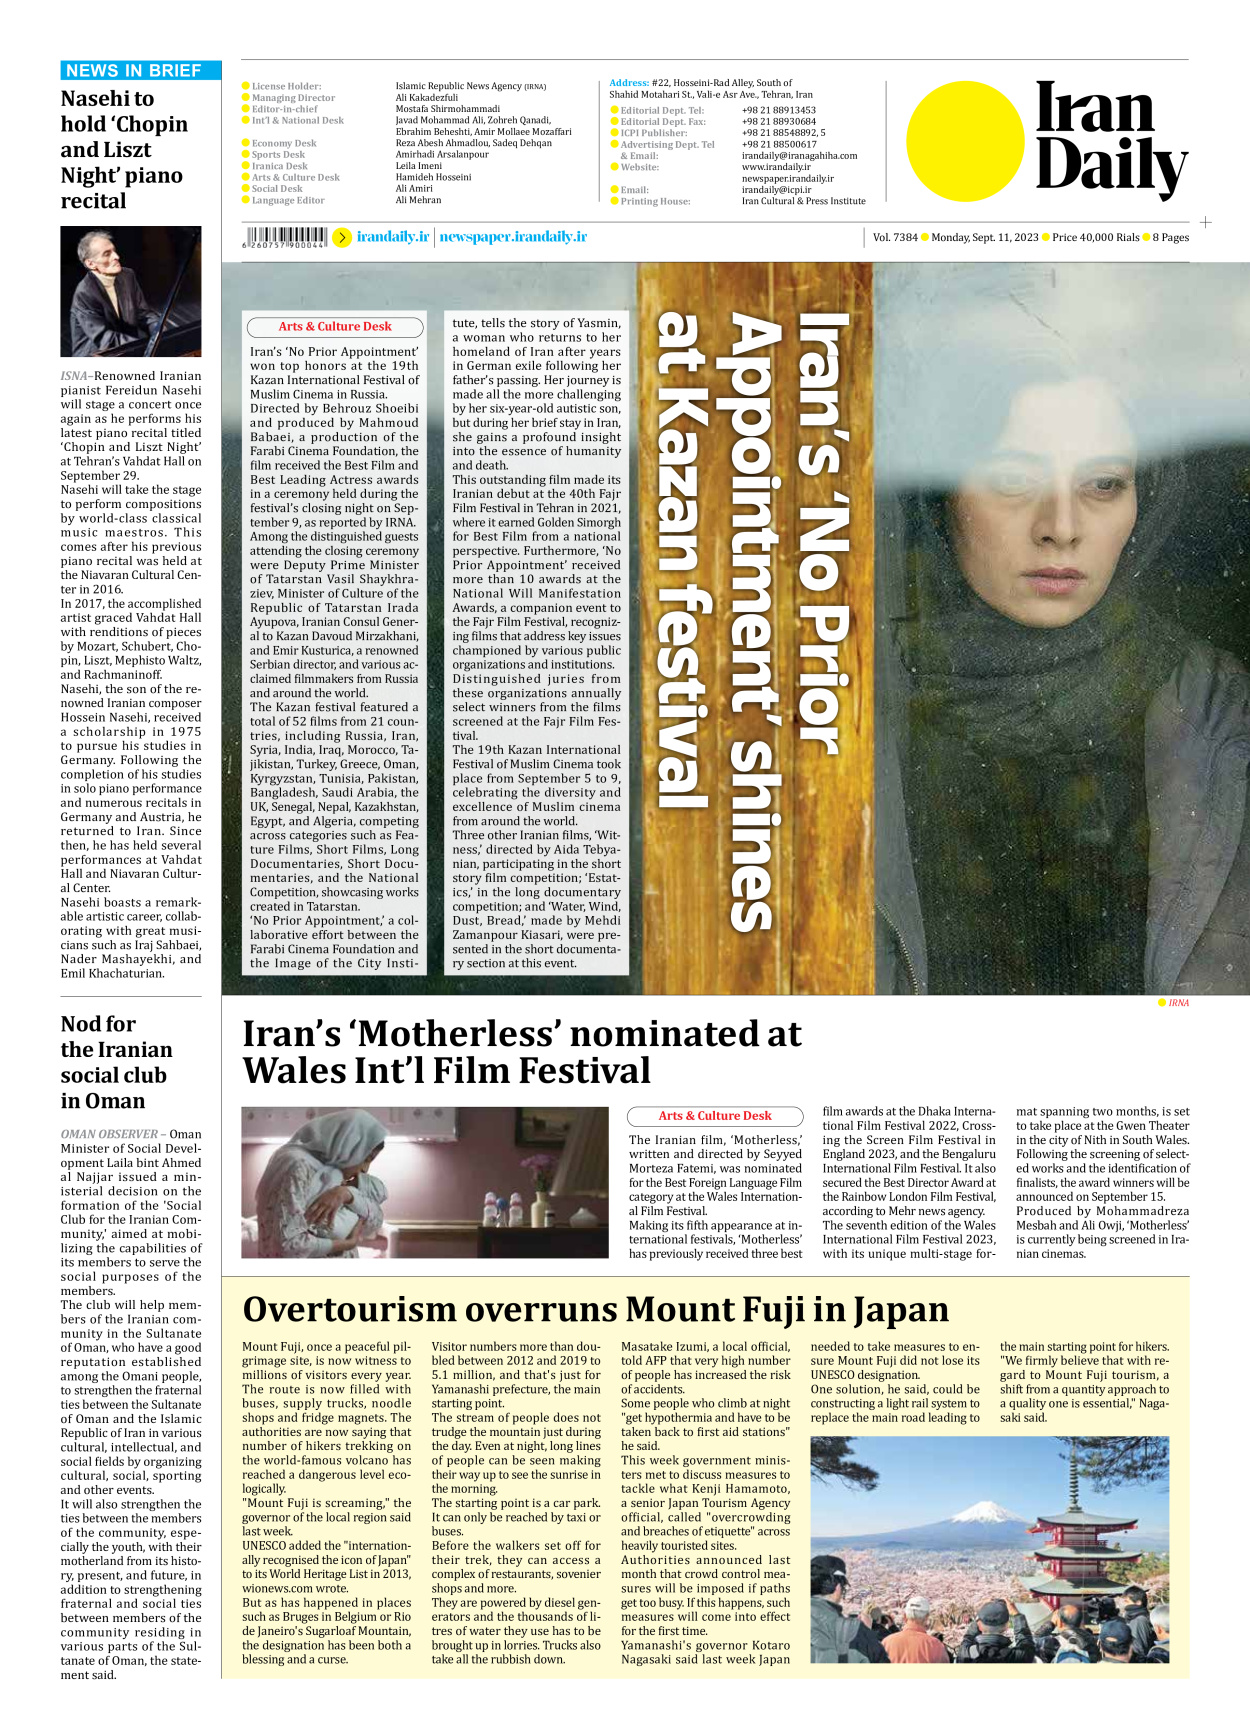 Iran Daily - Number Seven Thousand Three Hundred and Eighty Four - 11 September 2023 - Page 8